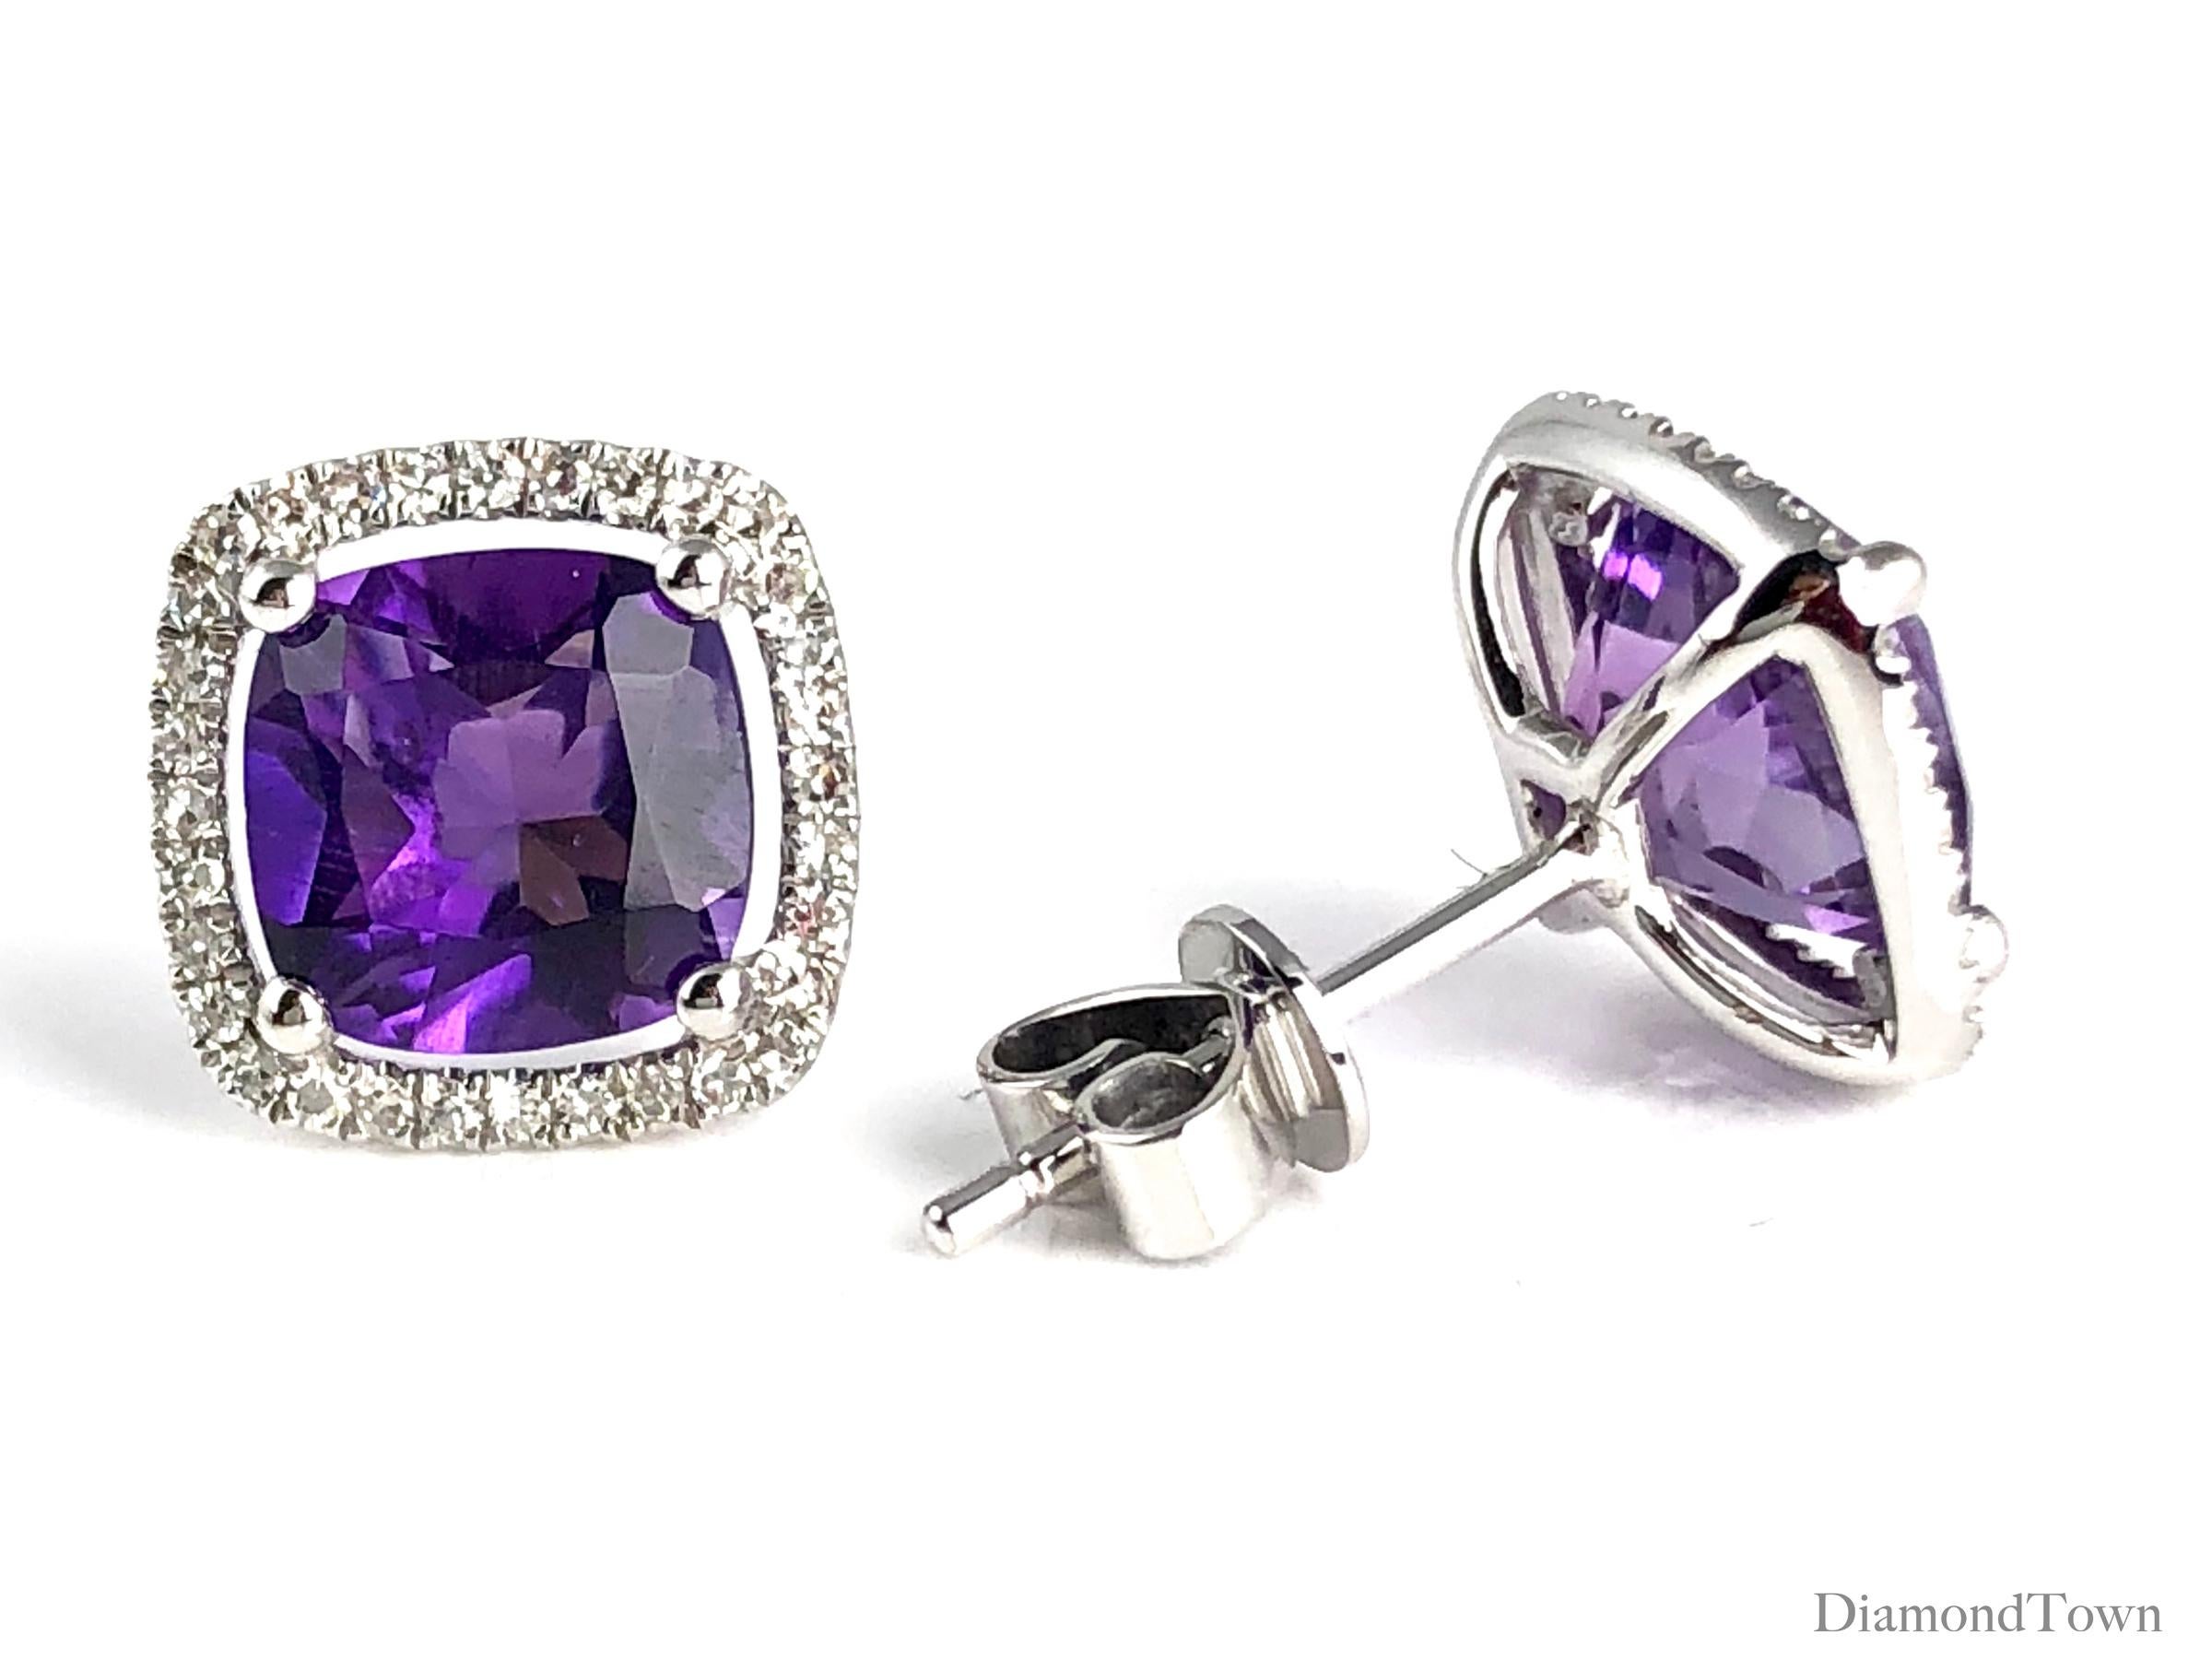 These stunning halo stud earrings feature 2.76 carats Fine Amethyst, surrounded by a halo of round white diamonds.

Center: two cushion cut Fine Amethyst stones total 2.76 carats
Diamond Halo: 64 round diamonds total 0.18 carats
Set in 14k White